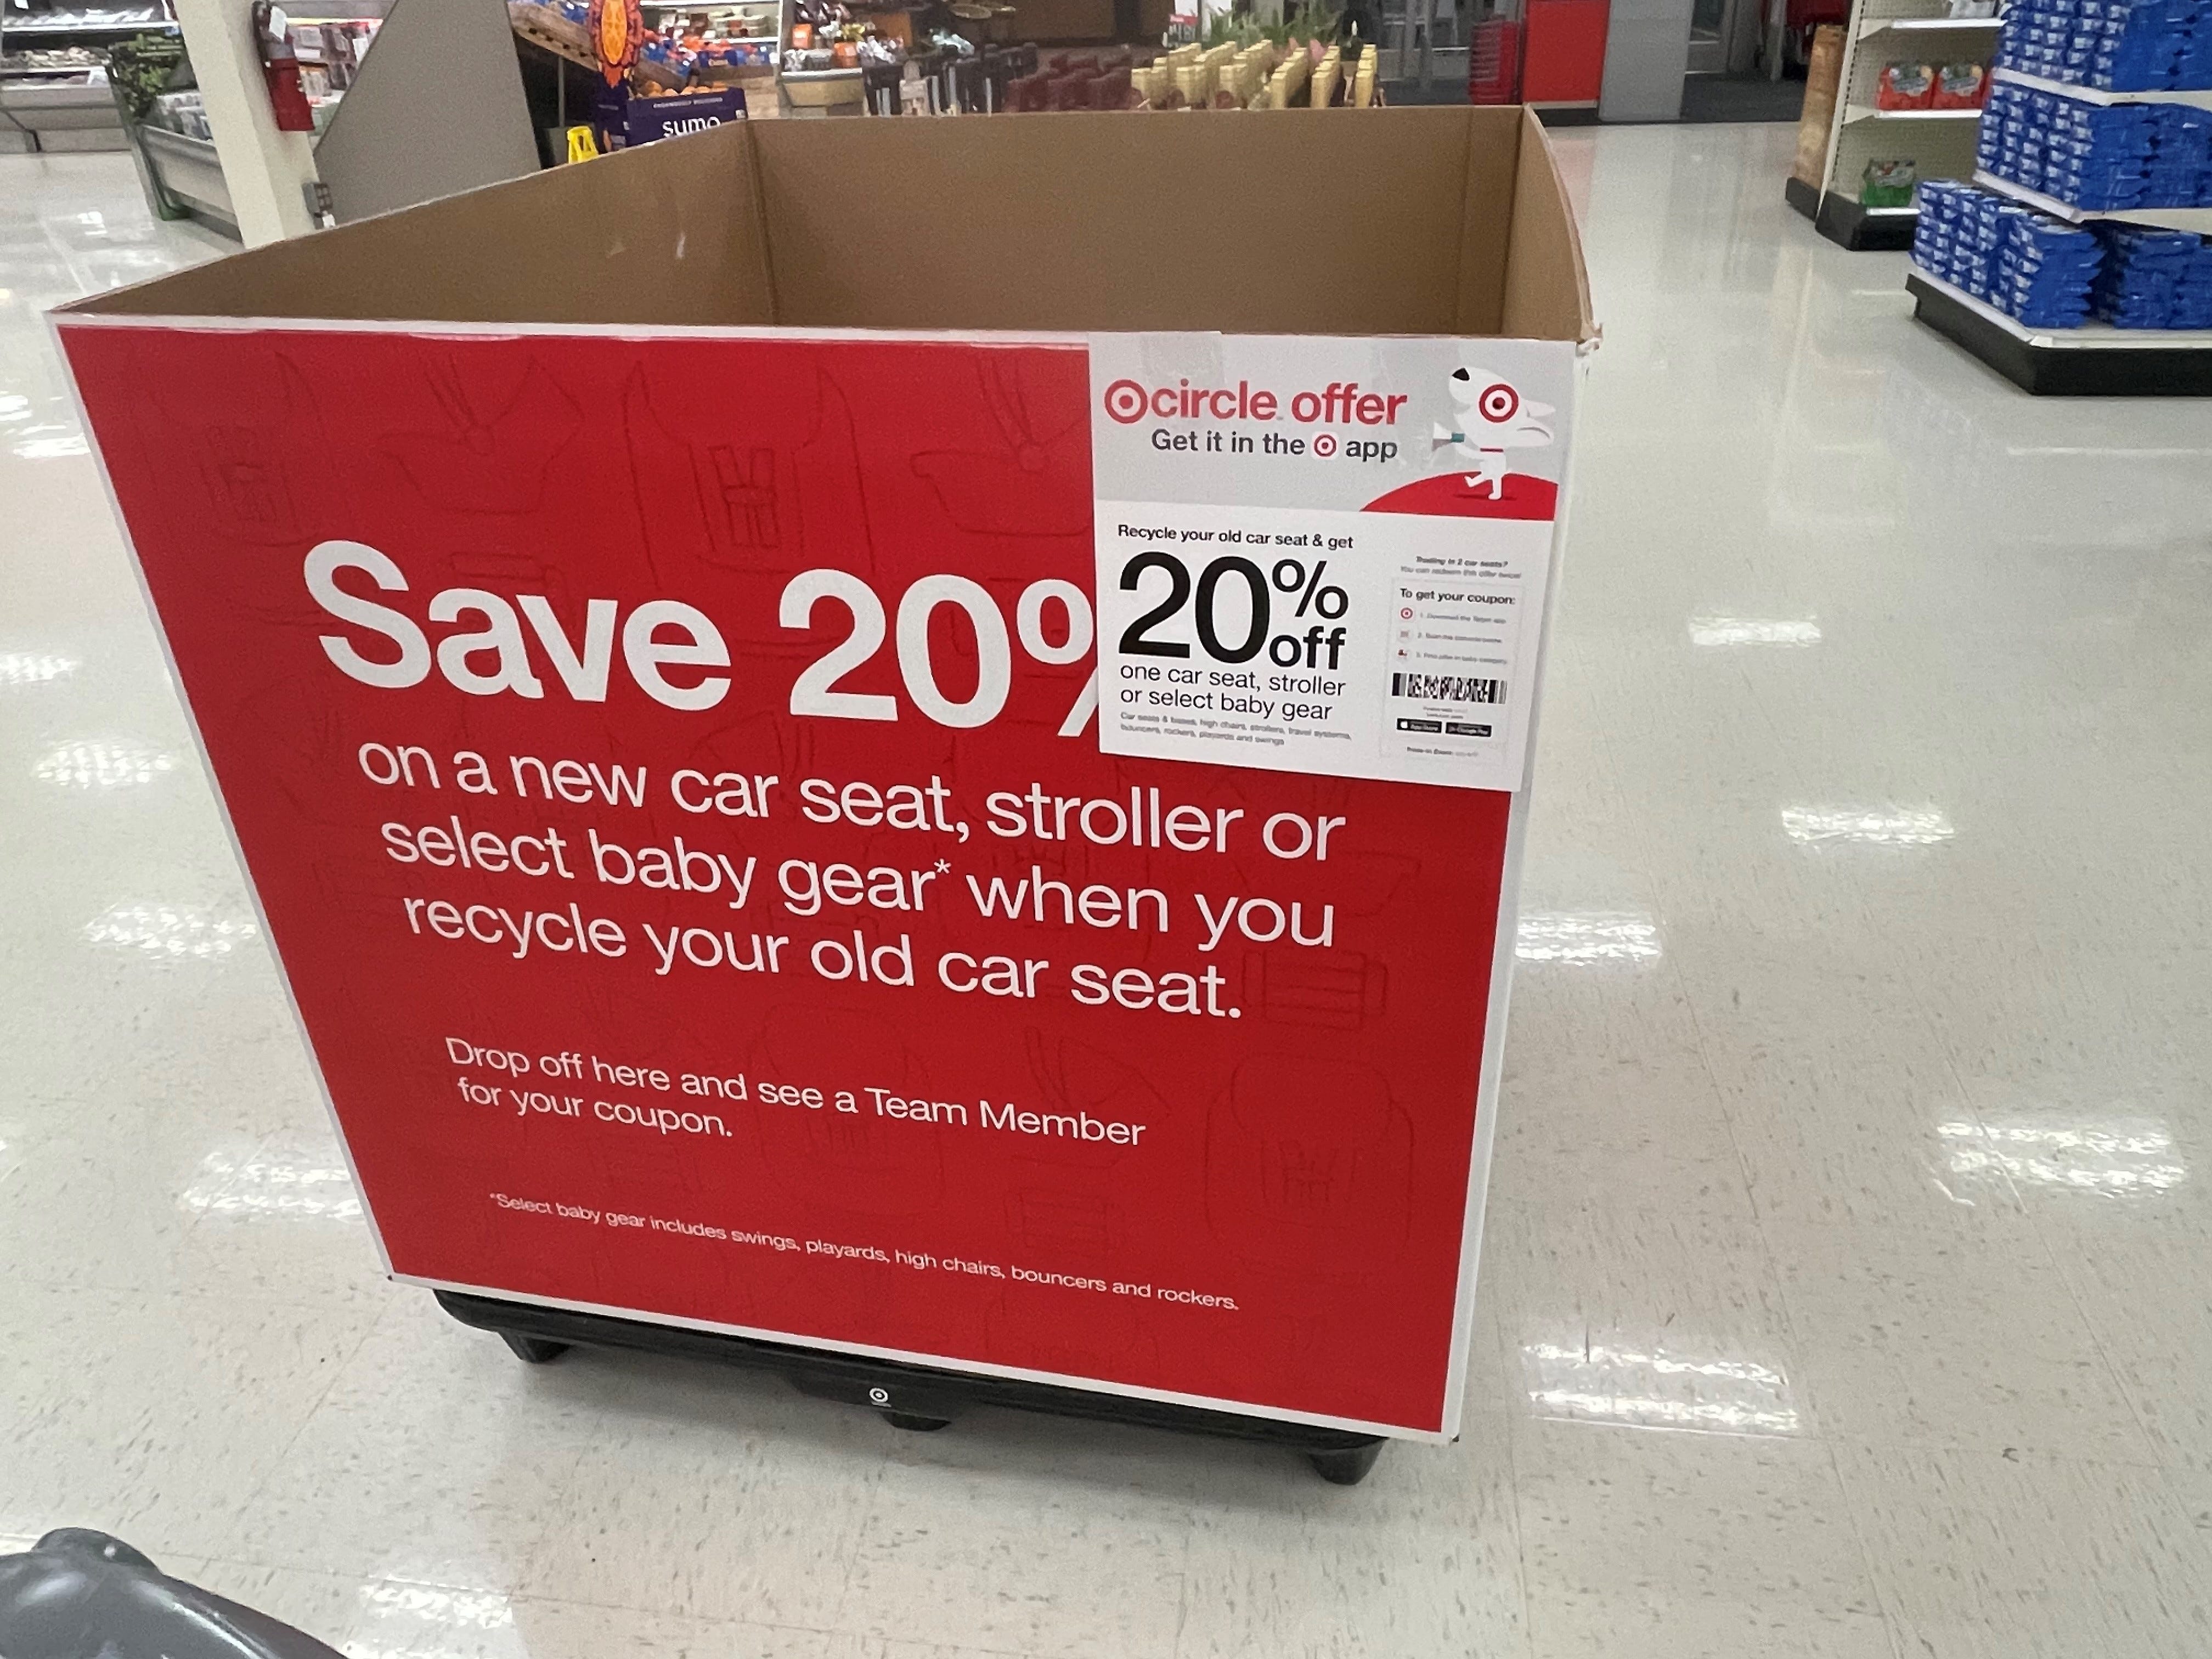 Target Car Seat Trade In 2021 Get 20, When Does Target Do Car Seat Trade In 2020